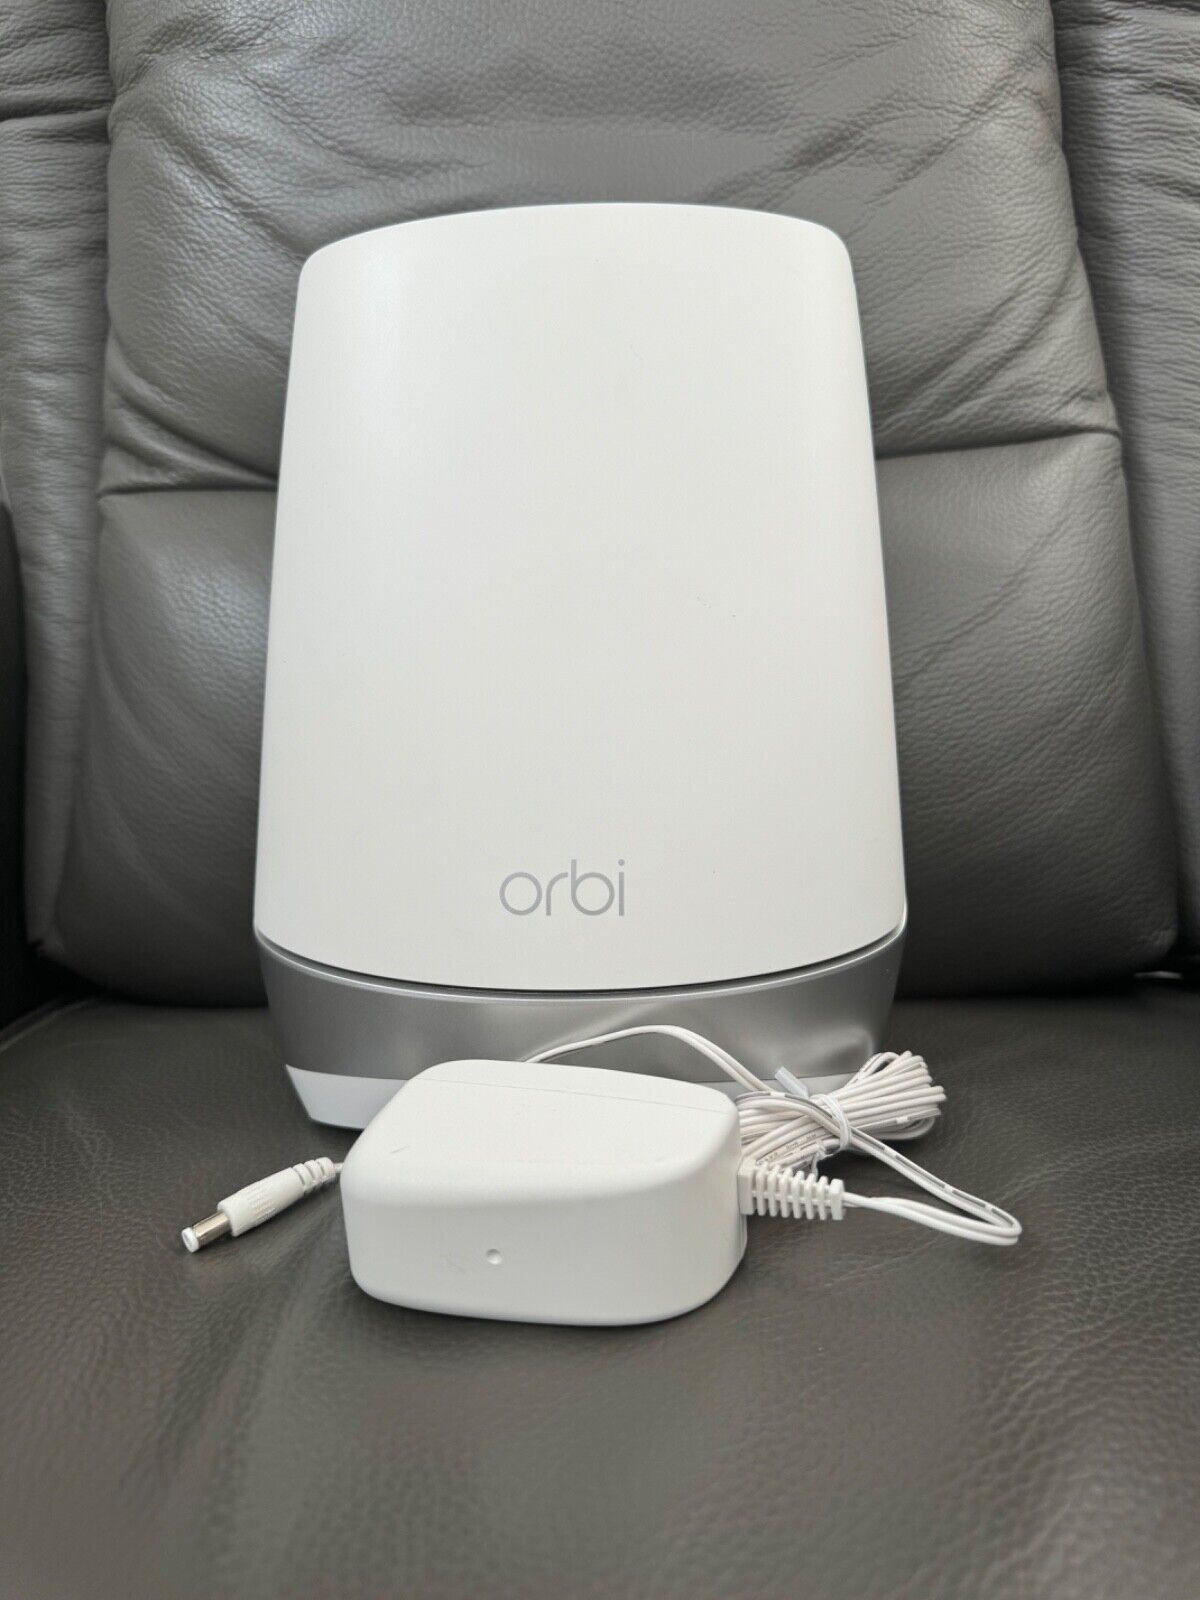 NETGEAR Orbi Whole Home Tri-band Mesh Add-on Satellite (RBS750) with wall mount